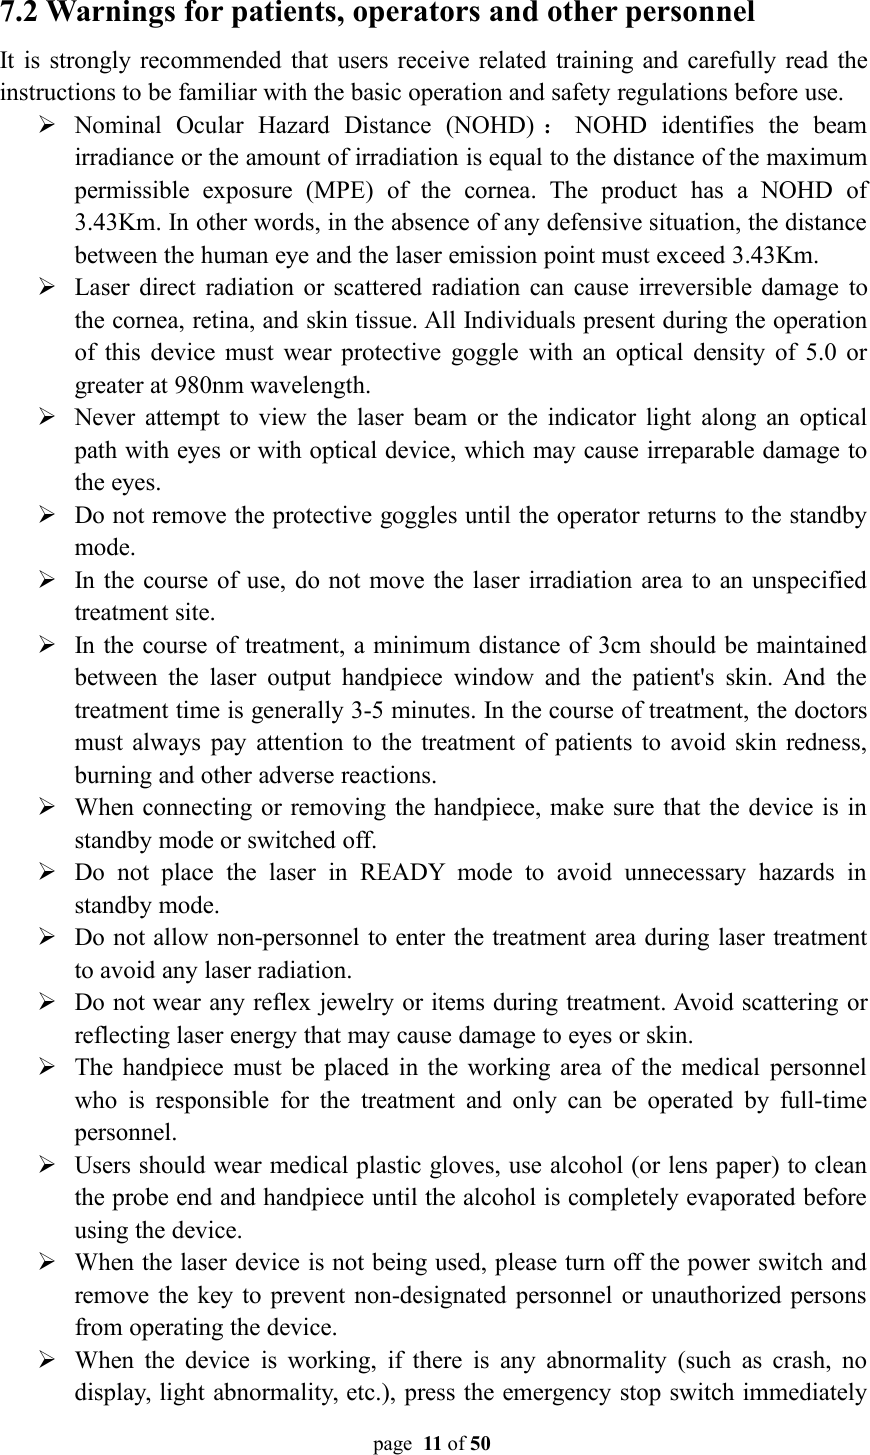 page 11 of 507.2 Warnings for patients, operators and other personnelIt is strongly recommended that users receive related training and carefully read theinstructions to be familiar with the basic operation and safety regulations before use.Nominal Ocular Hazard Distance (NOHD) ：NOHD identifies the beamirradiance or the amount of irradiation is equal to the distance of the maximumpermissible exposure (MPE) of the cornea. The product has a NOHD of3.43Km. In other words, in the absence of any defensive situation, the distancebetween the human eye and the laser emission point must exceed 3.43Km.Laser direct radiation or scattered radiation can cause irreversible damage tothe cornea, retina, and skin tissue. All Individuals present during the operationof this device must wear protective goggle with an optical density of 5.0 orgreater at 980nm wavelength.Never attempt to view the laser beam or the indicator light along an opticalpath with eyes or with optical device, which may cause irreparable damage tothe eyes.Do not remove the protective goggles until the operator returns to the standbymode.In the course of use, do not move the laser irradiation area to an unspecifiedtreatment site.In the course of treatment, a minimum distance of 3cm should be maintainedbetween the laser output handpiece window and the patient&apos;s skin. And thetreatment time is generally 3-5 minutes. In the course of treatment, the doctorsmust always pay attention to the treatment of patients to avoid skin redness,burning and other adverse reactions.When connecting or removing the handpiece, make sure that the device is instandby mode or switched off.Do not place the laser in READY mode to avoid unnecessary hazards instandby mode.Do not allow non-personnel to enter the treatment area during laser treatmentto avoid any laser radiation.Do not wear any reflex jewelry or items during treatment. Avoid scattering orreflecting laser energy that may cause damage to eyes or skin.The handpiece must be placed in the working area of the medical personnelwho is responsible for the treatment and only can be operated by full-timepersonnel.Users should wear medical plastic gloves, use alcohol (or lens paper) to cleanthe probe end and handpiece until the alcohol is completely evaporated beforeusing the device.When the laser device is not being used, please turn off the power switch andremove the key to prevent non-designated personnel or unauthorized personsfrom operating the device.When the device is working, if there is any abnormality (such as crash, nodisplay, light abnormality, etc.), press the emergency stop switch immediately